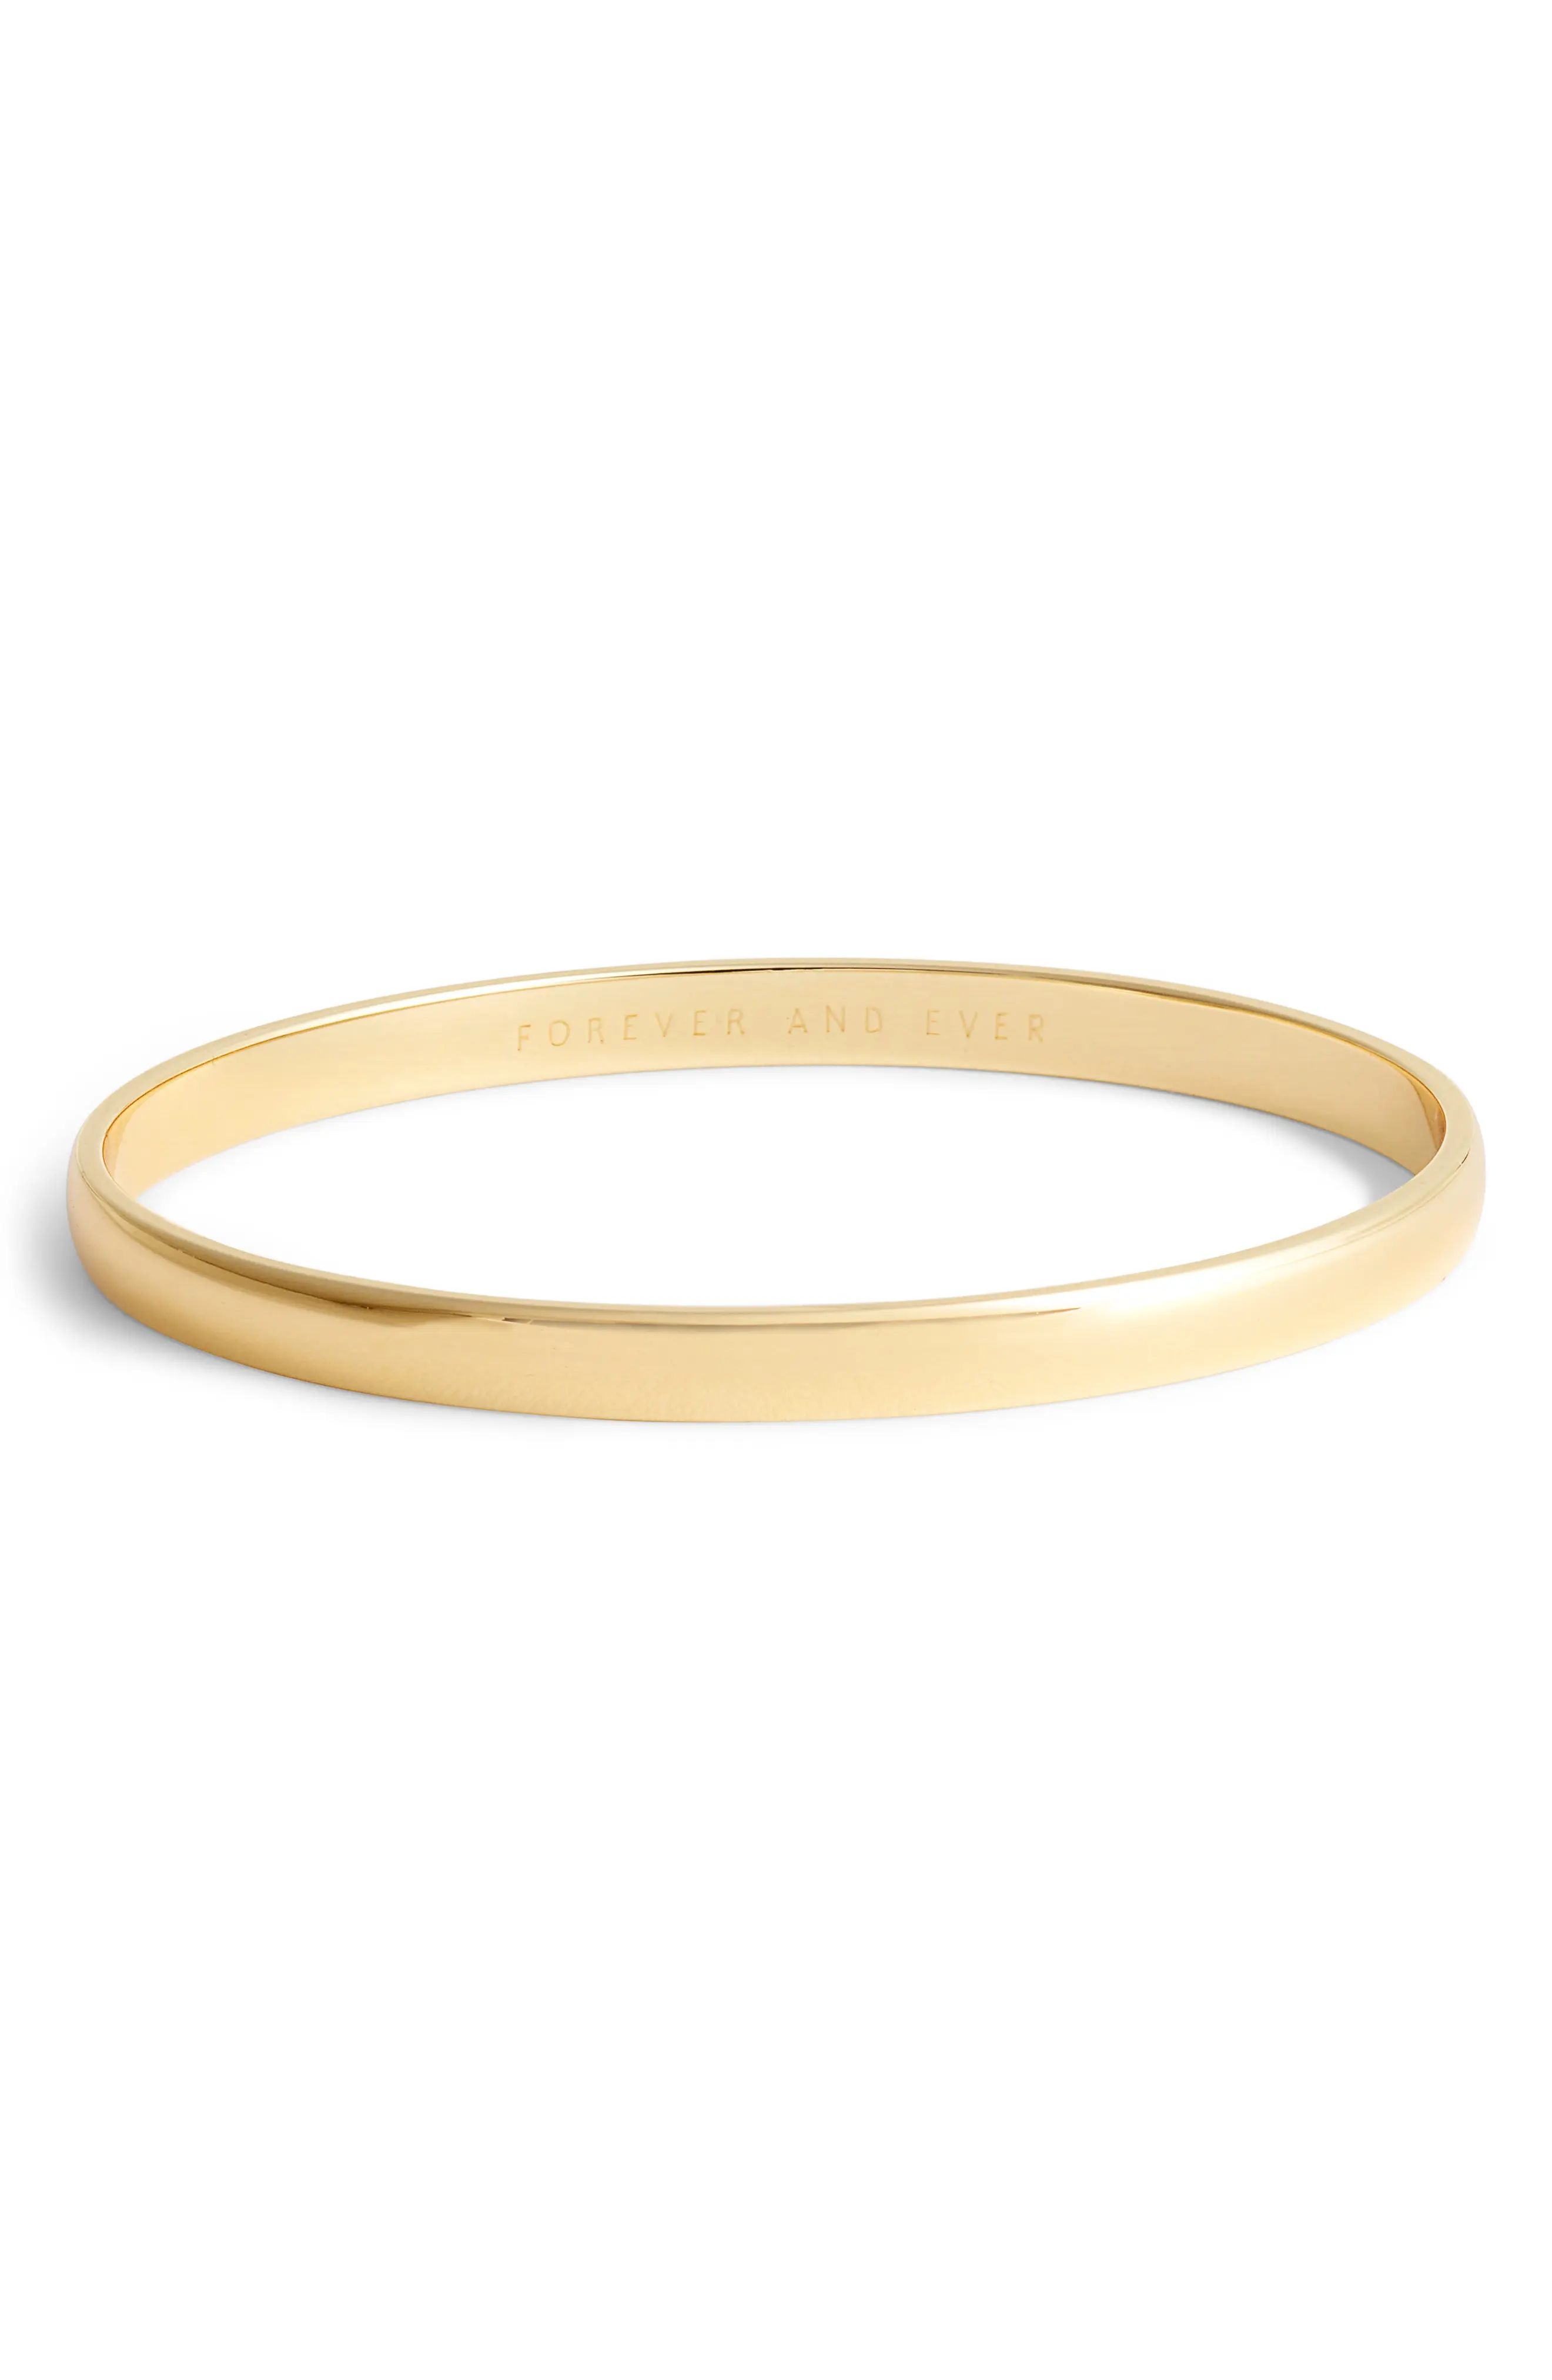 forever and ever bangle | Nordstrom